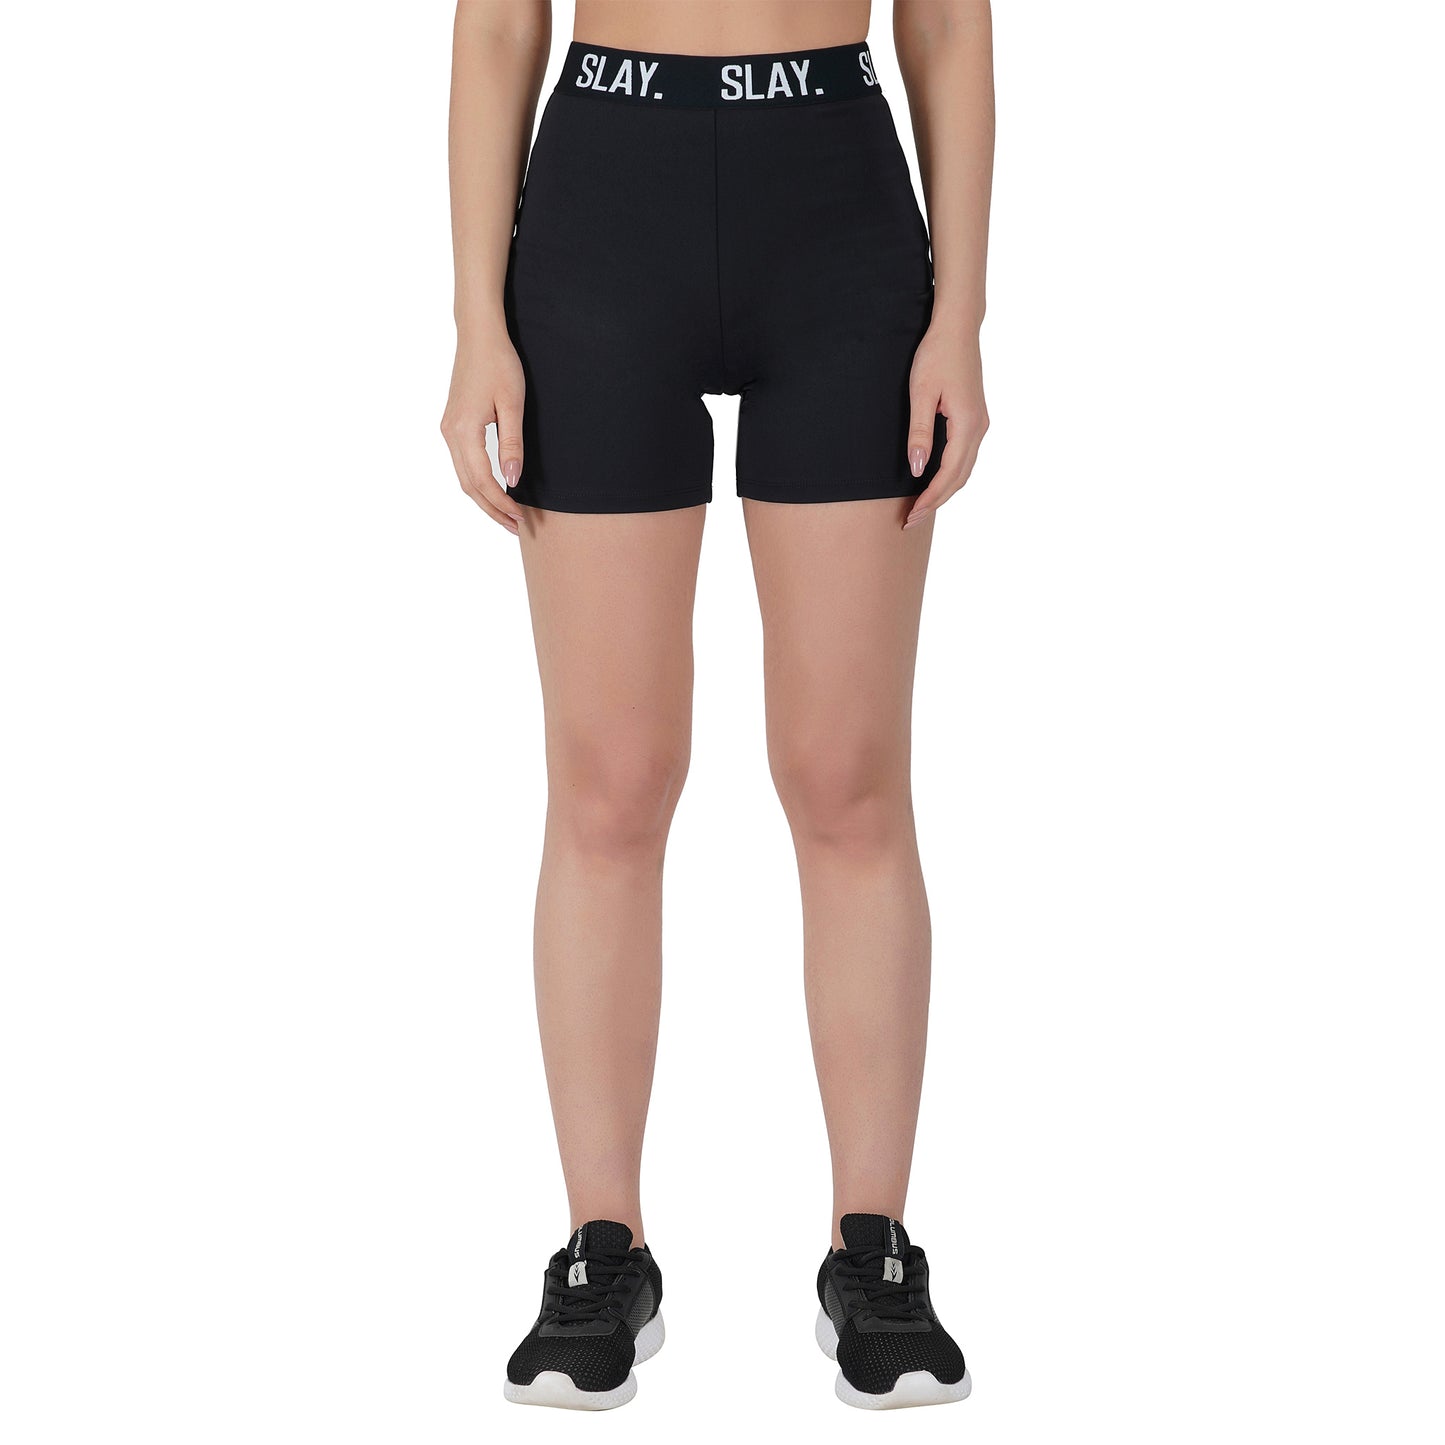 SLAY. Women's Black Activewear Backless Sports Bra And High waist Shorts Co-ord Set